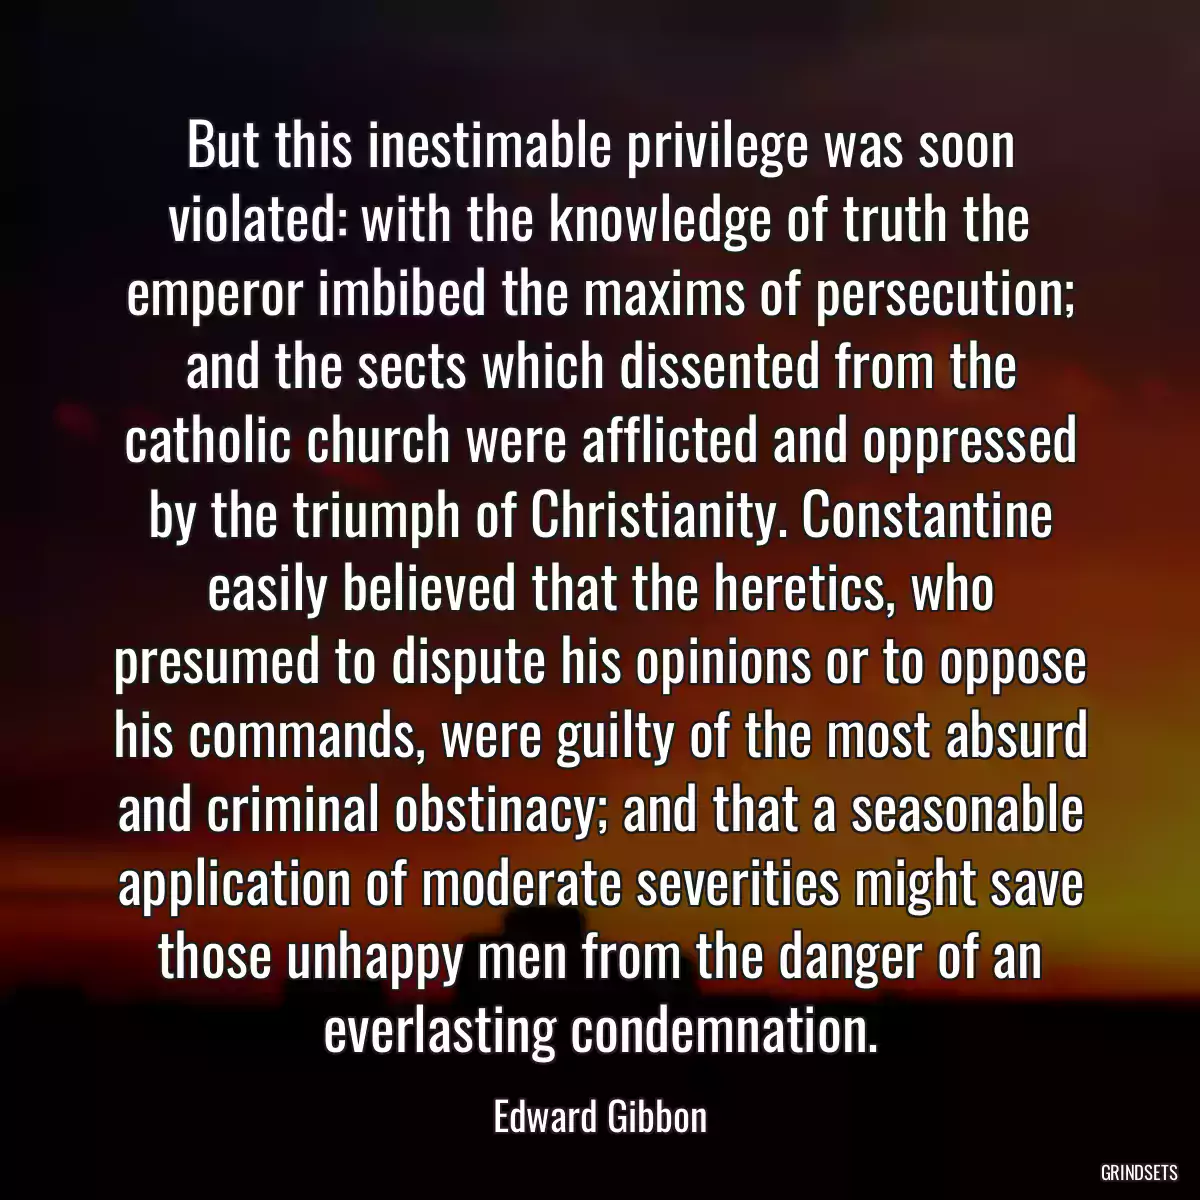 But this inestimable privilege was soon violated: with the knowledge of truth the emperor imbibed the maxims of persecution; and the sects which dissented from the catholic church were afflicted and oppressed by the triumph of Christianity. Constantine easily believed that the heretics, who presumed to dispute his opinions or to oppose his commands, were guilty of the most absurd and criminal obstinacy; and that a seasonable application of moderate severities might save those unhappy men from the danger of an everlasting condemnation.